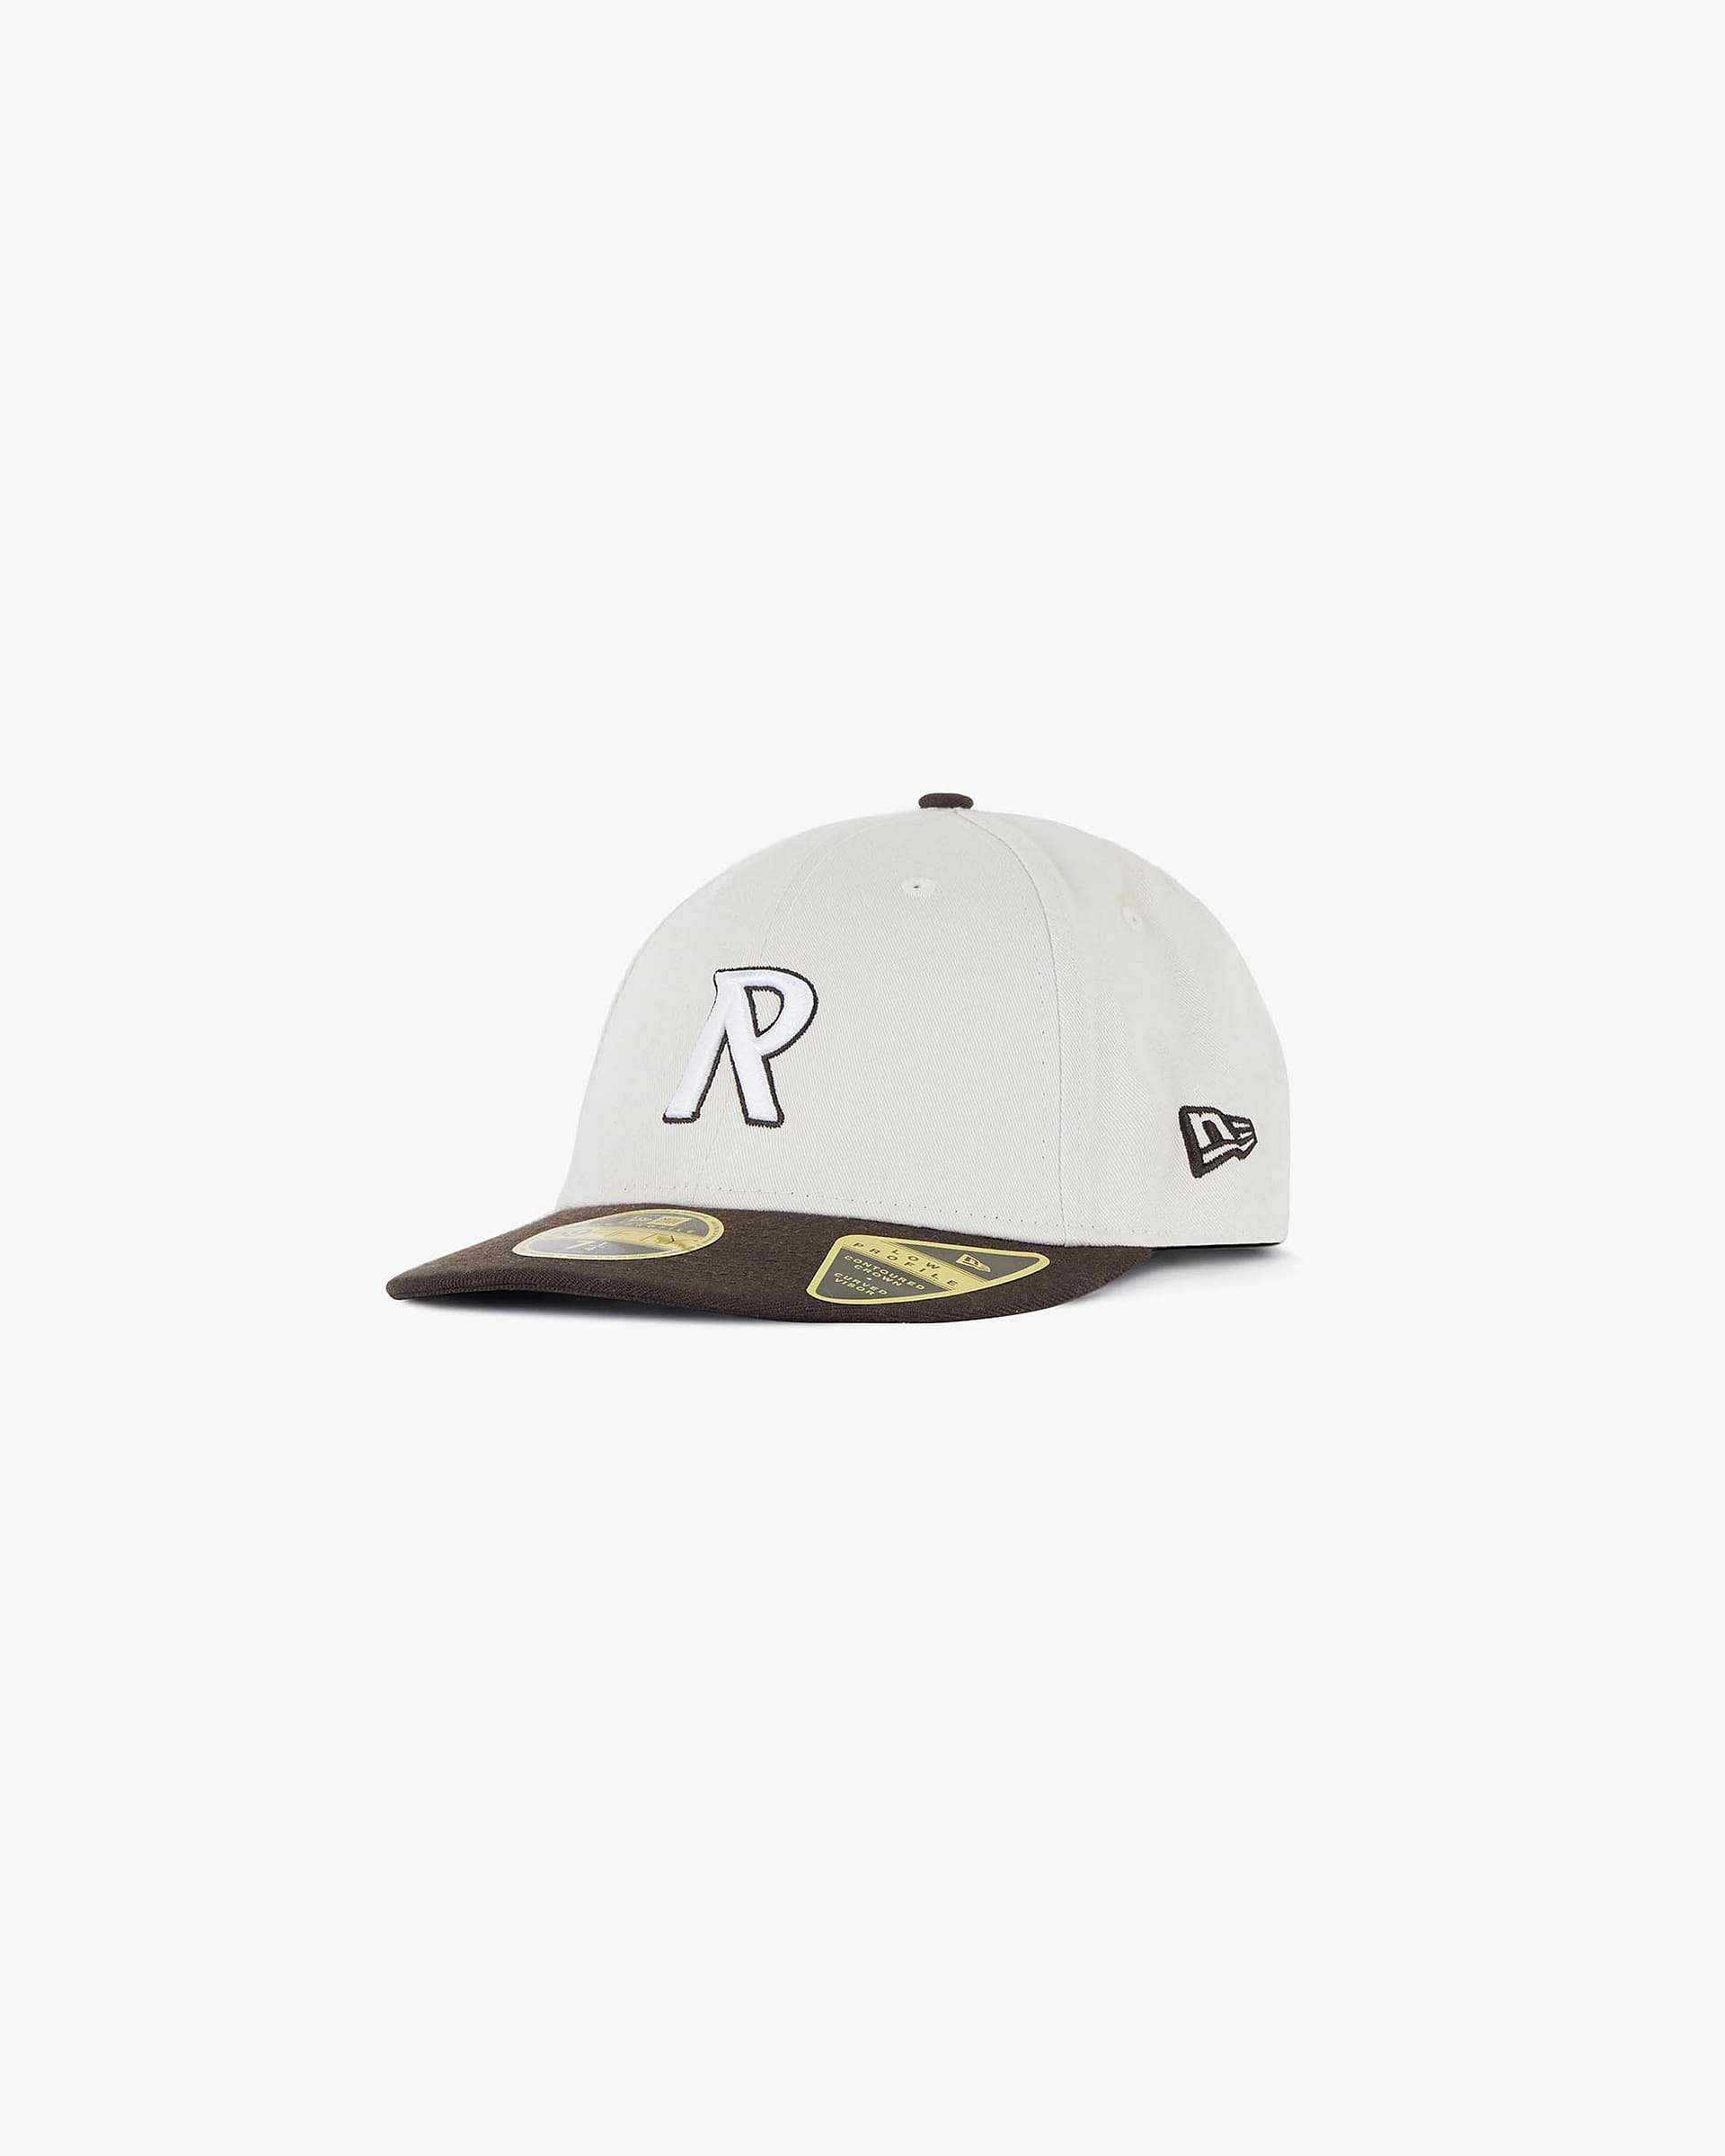 Represent New Era 59Fifty Fitted Hat – Street Dreams